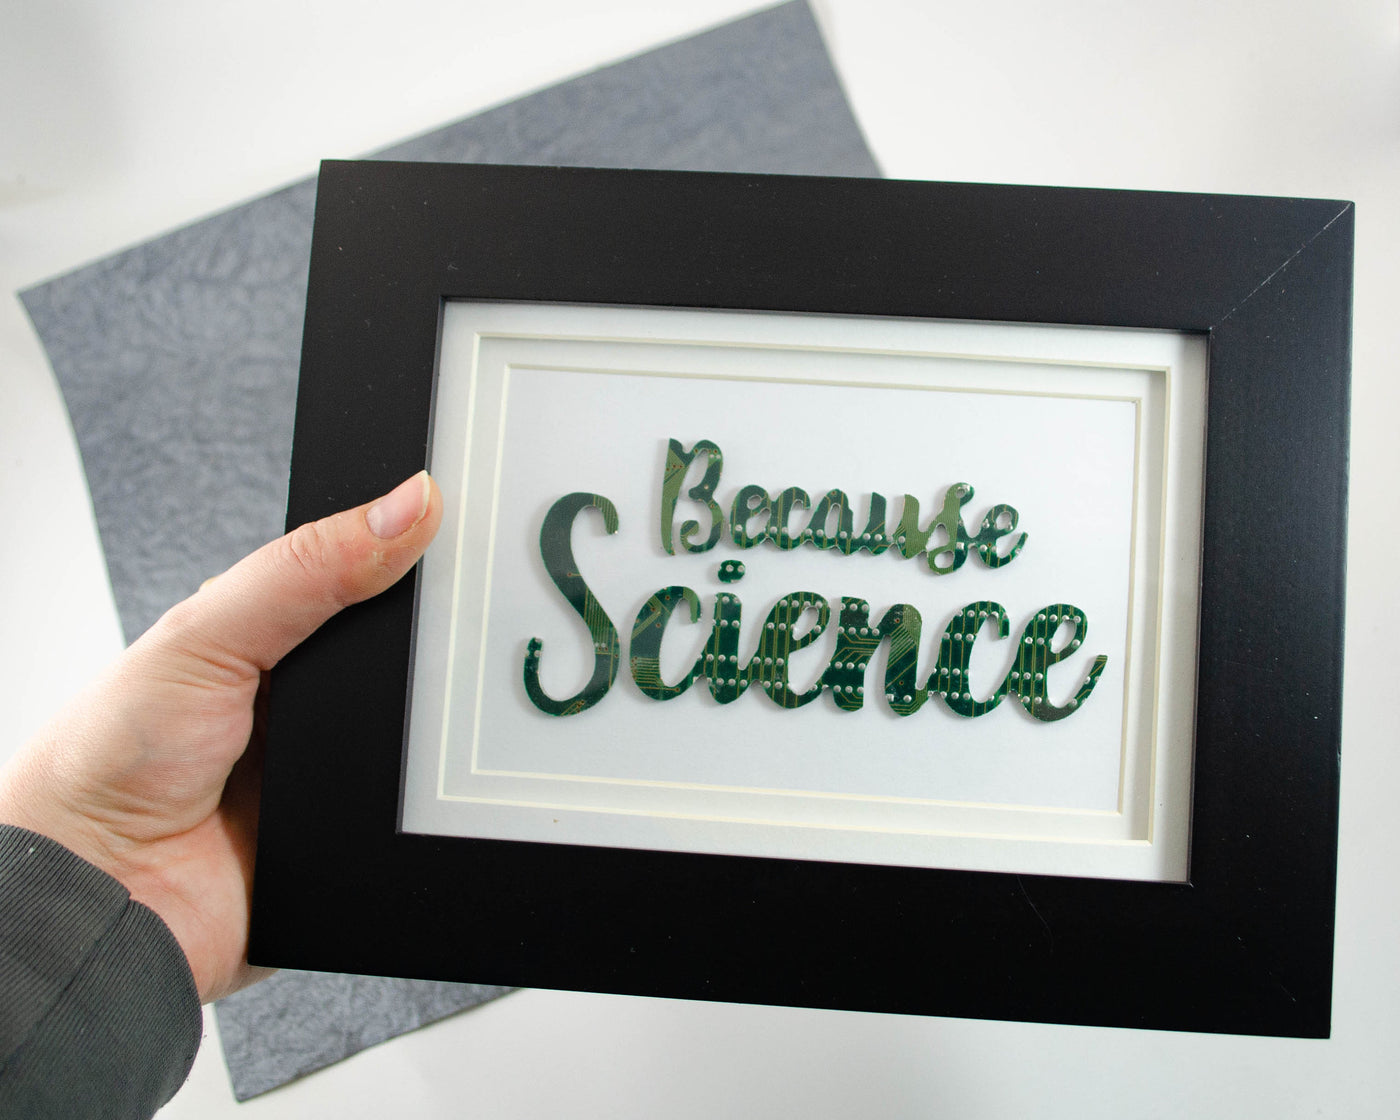 Because Science - Circuit Board Wall Art